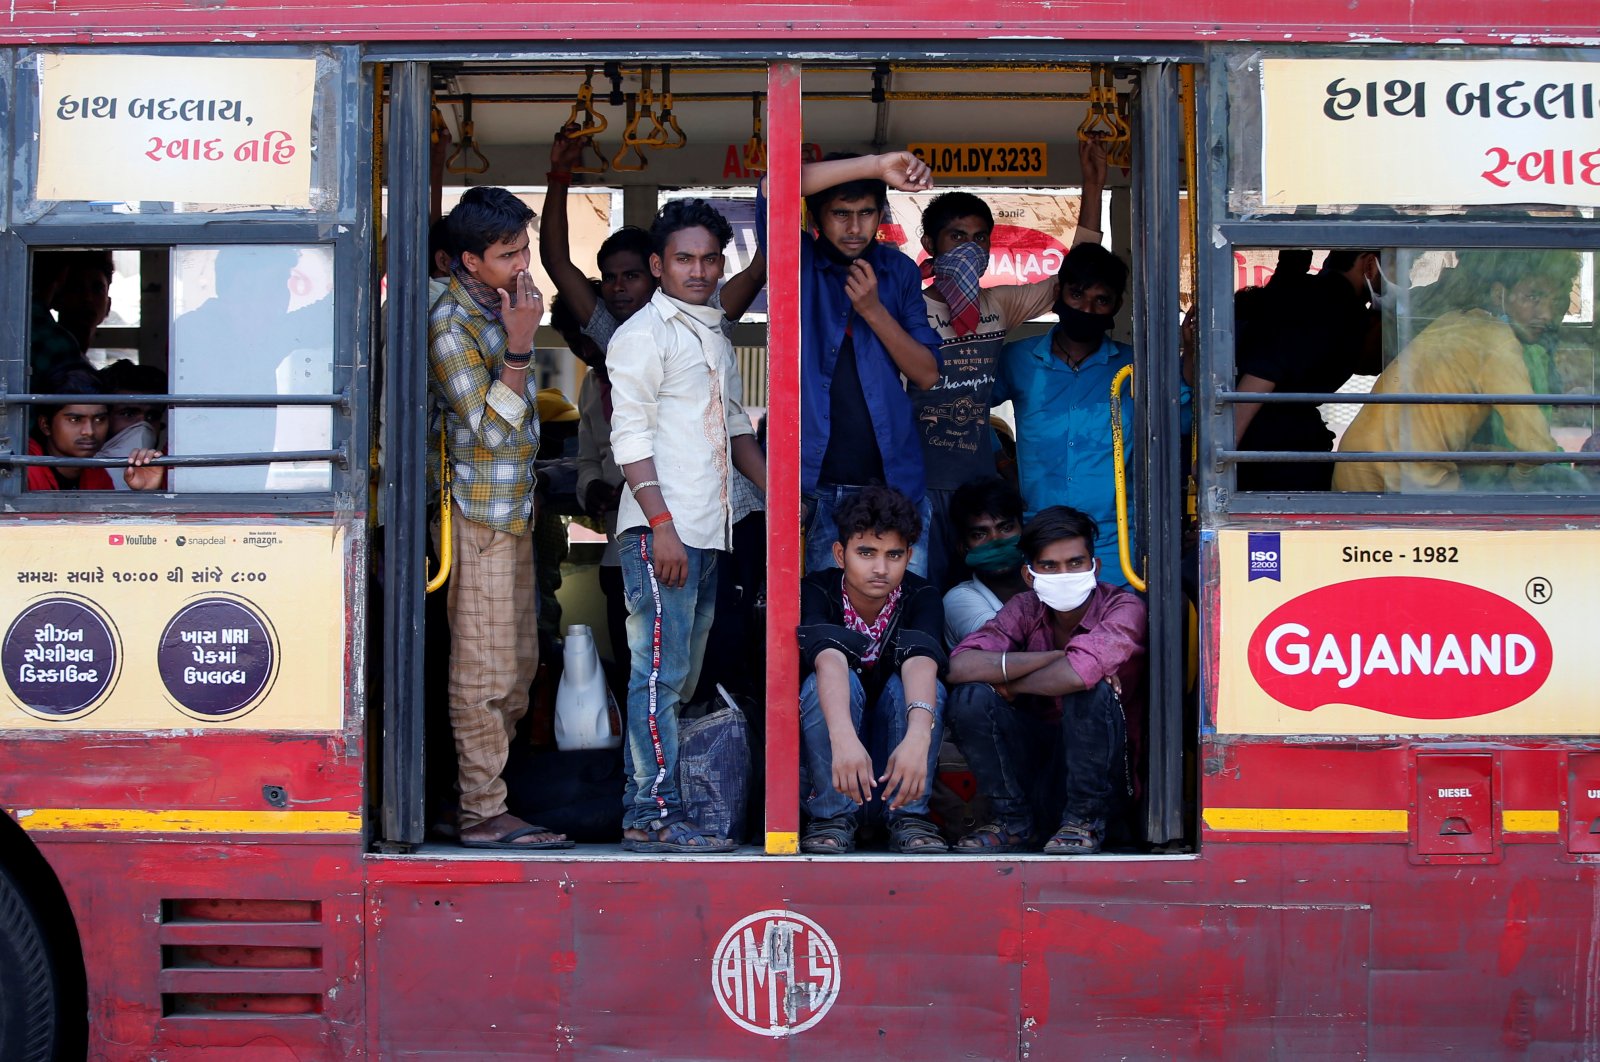 Migrant workers, who were stranded in the western state of Gujarat due to a lockdown imposed by the government to prevent the spread of the coronavirus, are seen inside a parked bus as they wait to board a train that will take them to their home state of eastern Bihar, in Ahmedabad, India, May 8, 2020. (Reuters Photo)